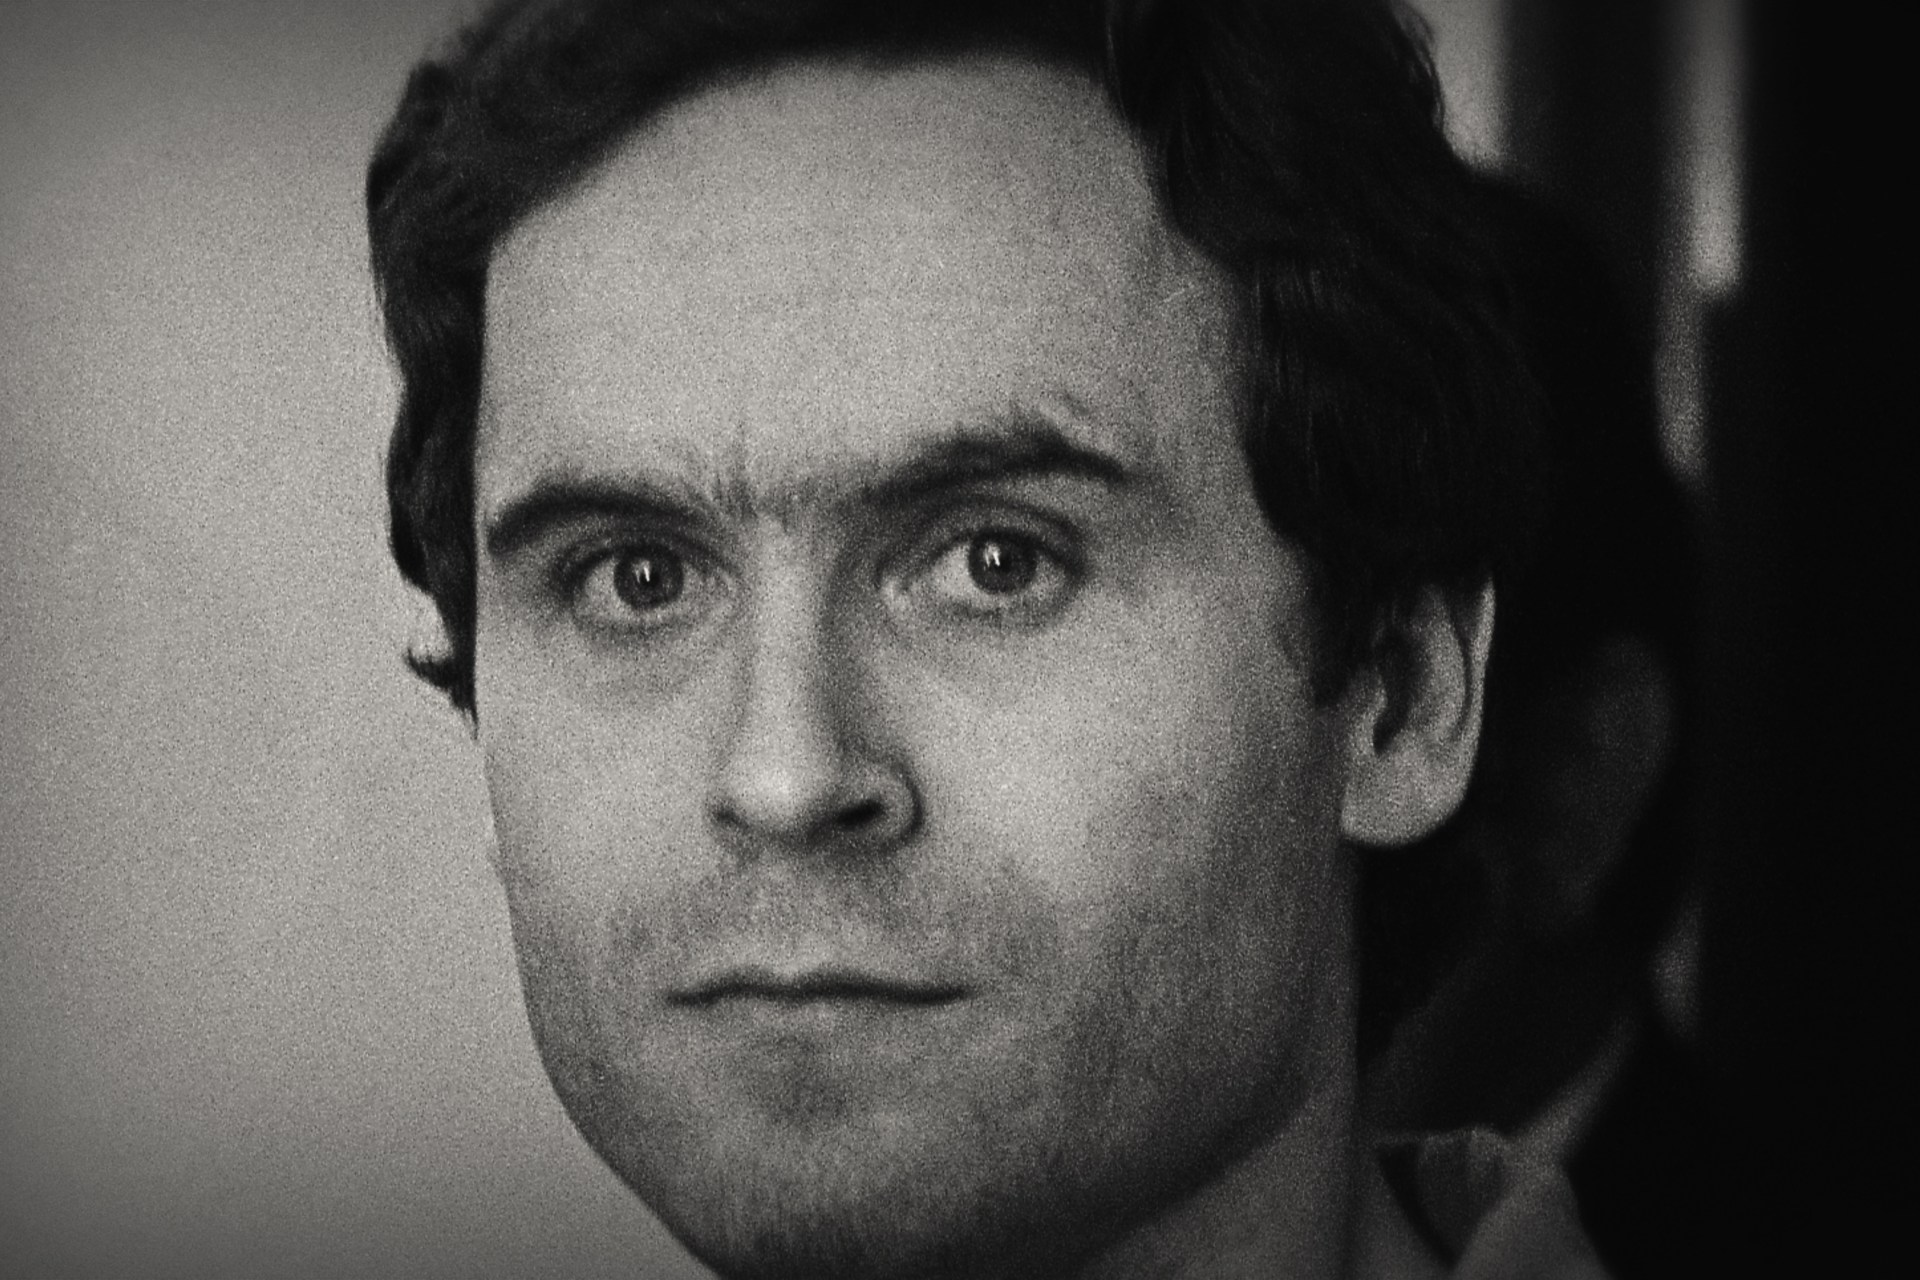 7 Horrific Facts I Learned About Ted Bundy While Watching ‘Conversations With A Killer: The Ted Bundy Case’ On Netflix